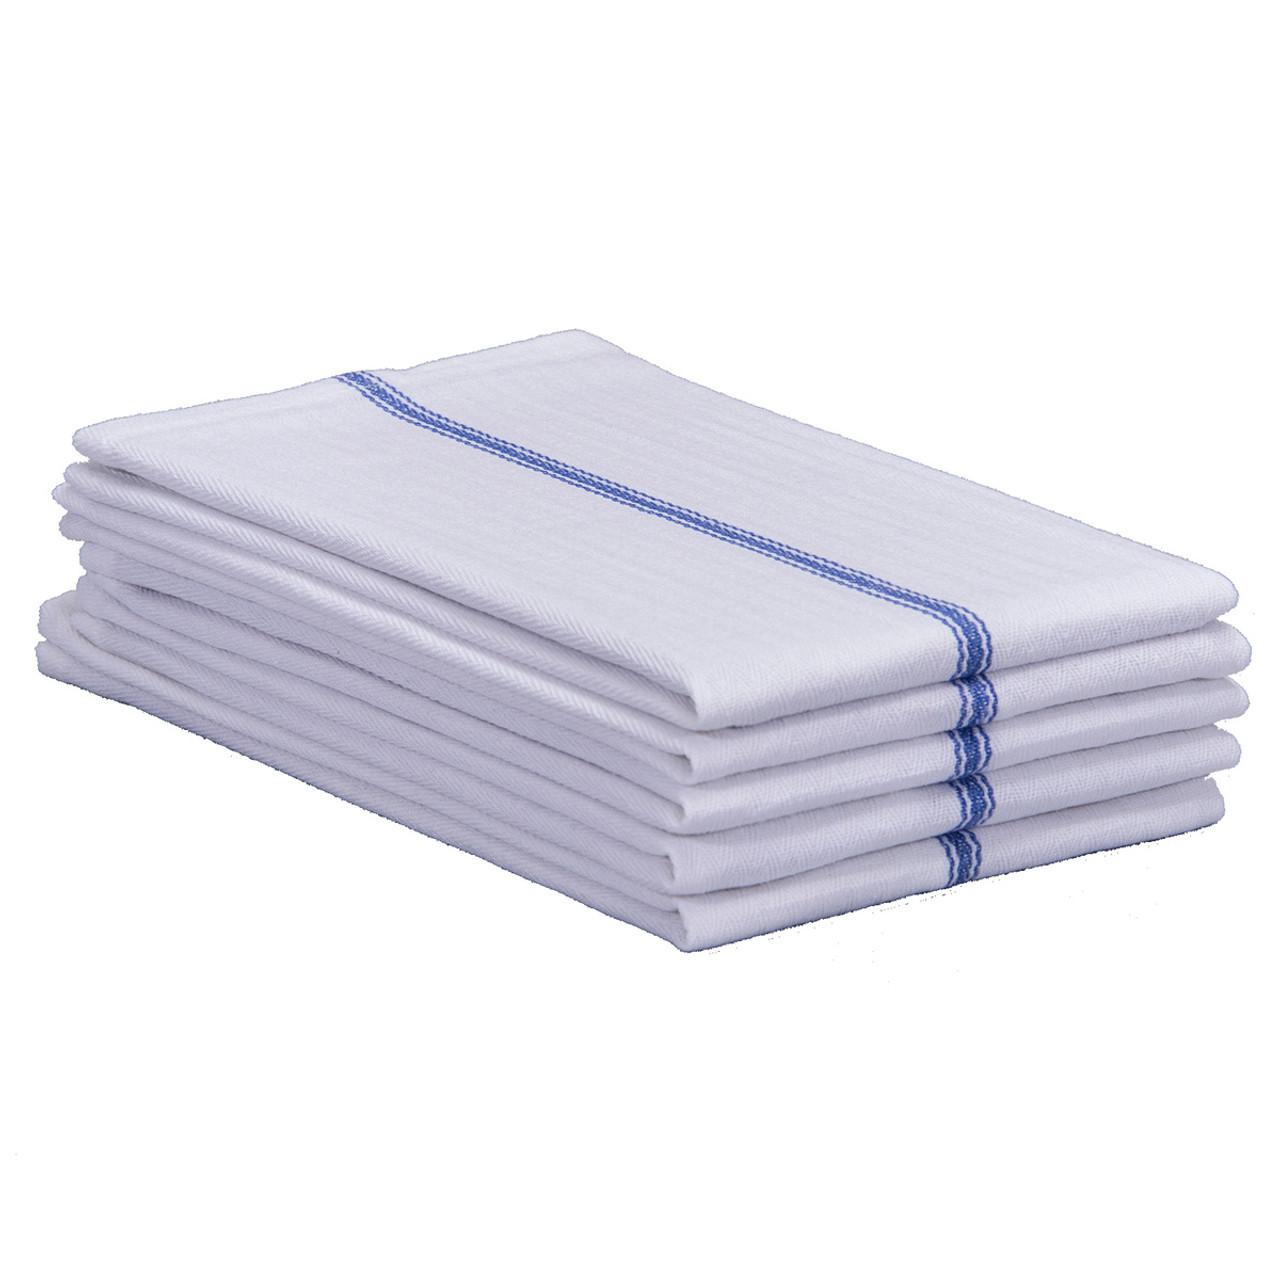 https://cdn11.bigcommerce.com/s-a5uwe4c7wz/images/stencil/1280x1280/products/502/1824/Herringbone-Towels-New-Cotton-White-with-Blue-Stripe__72557.1587156033.jpg?c=1